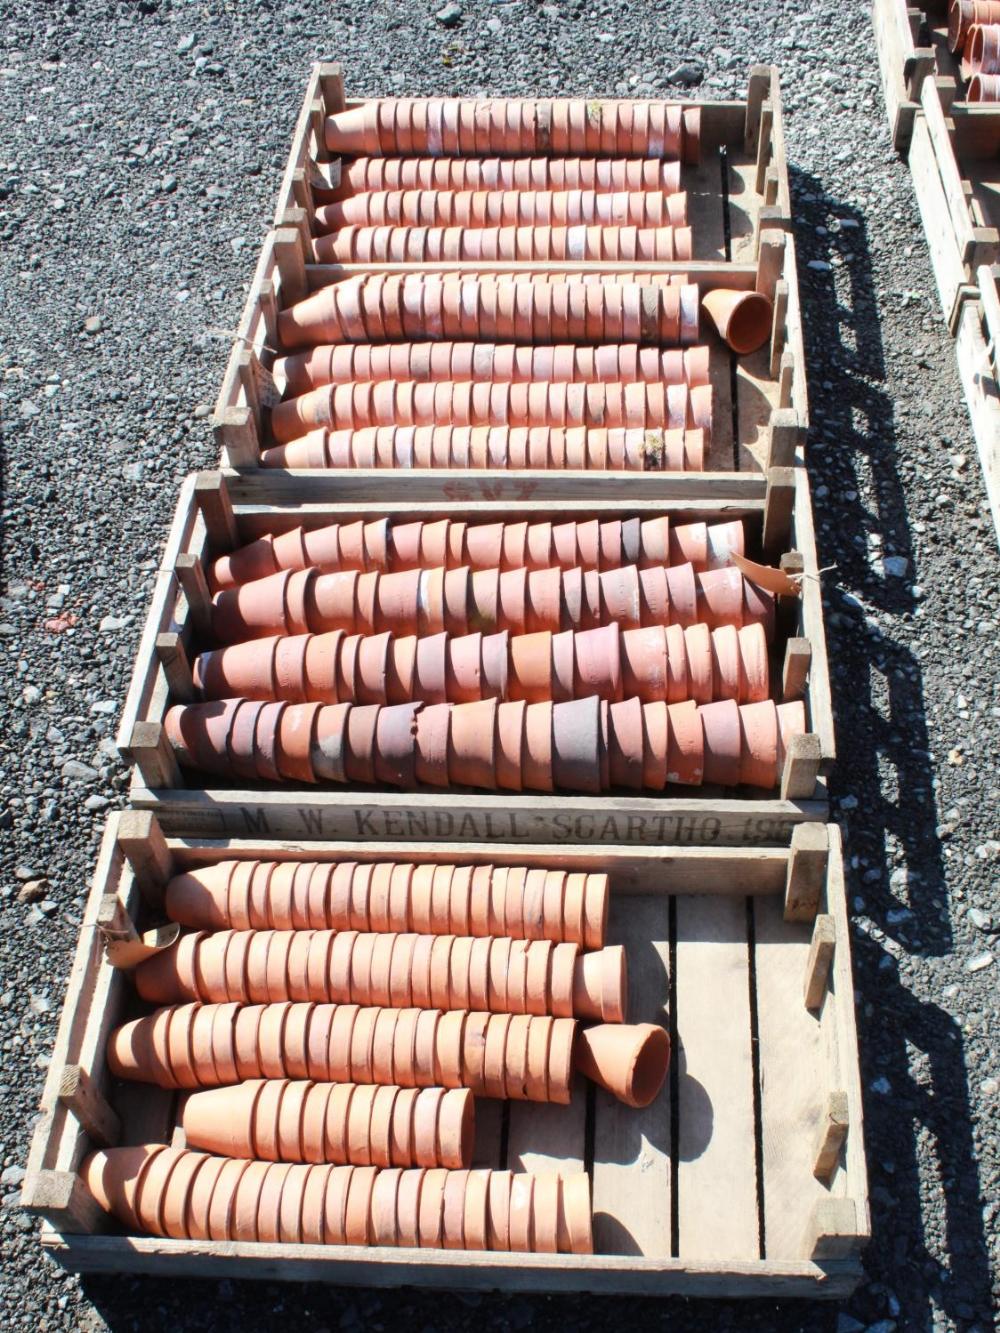 (Large quantity). Four crates of circa 1940s terracotta plant pots. Sizes 3 inch and 3 1/2 inch